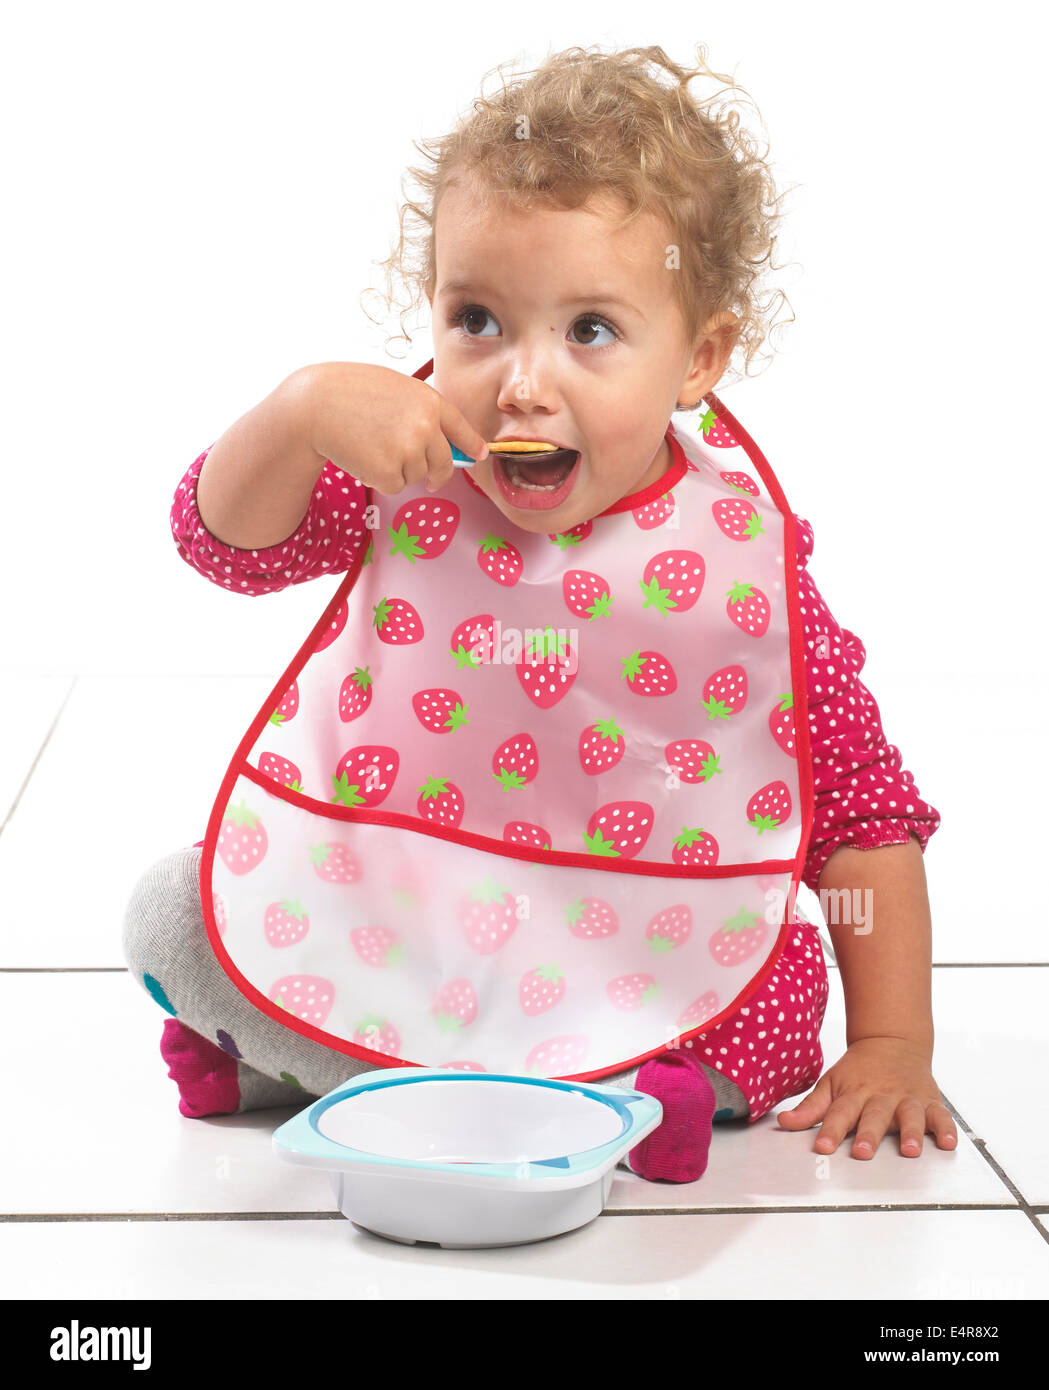 Girl (2 years) wearing large bib eating from bowl with spoon Stock Photo